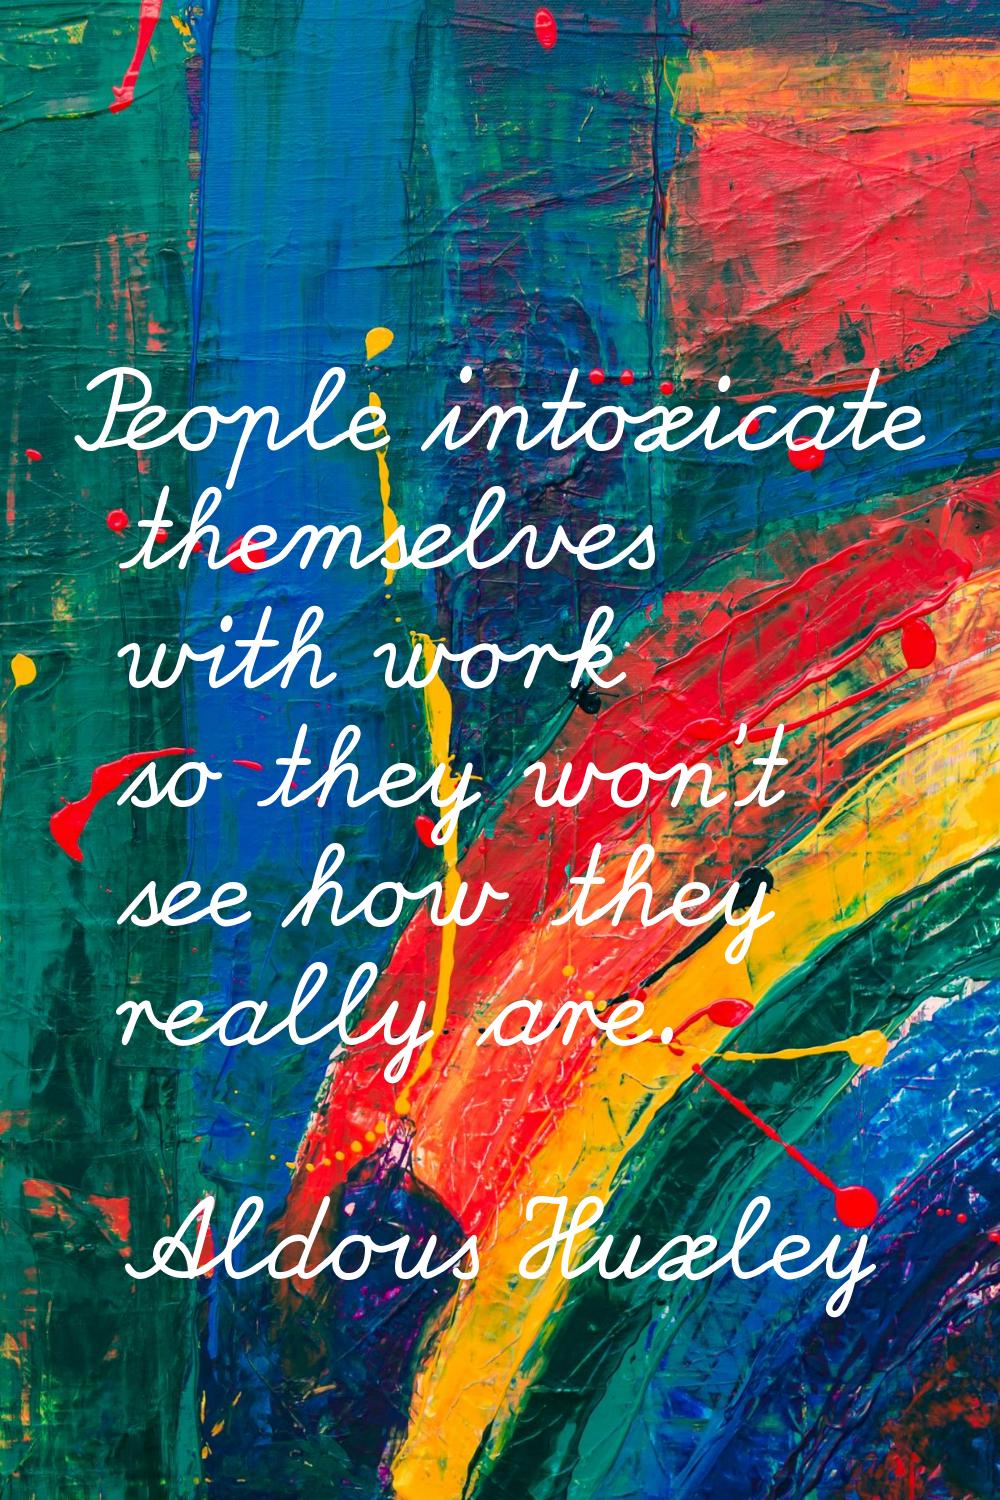 People intoxicate themselves with work so they won't see how they really are.